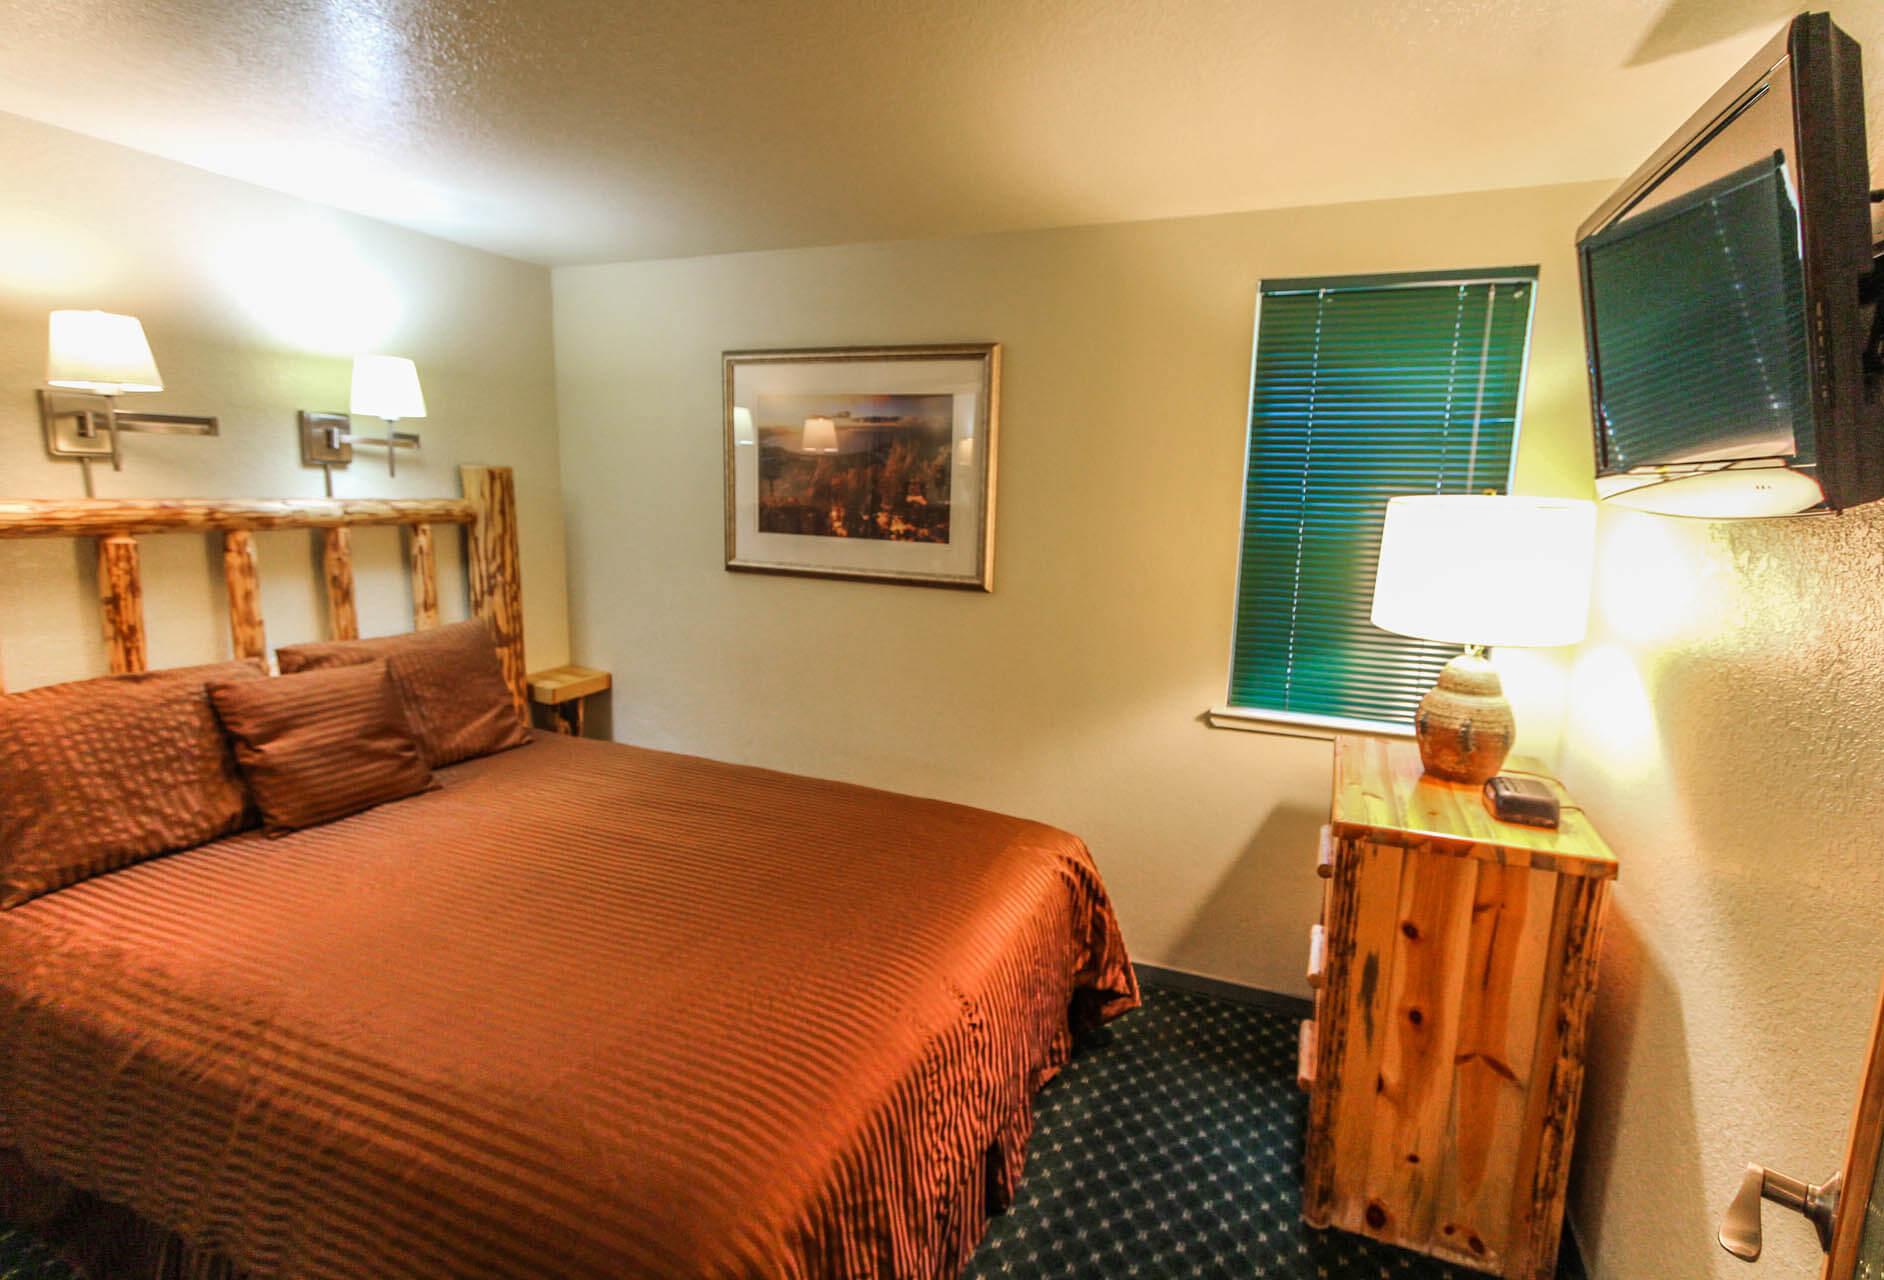 A cozy bedroom at VRI's The Lodge at Lake Tahoe in California.